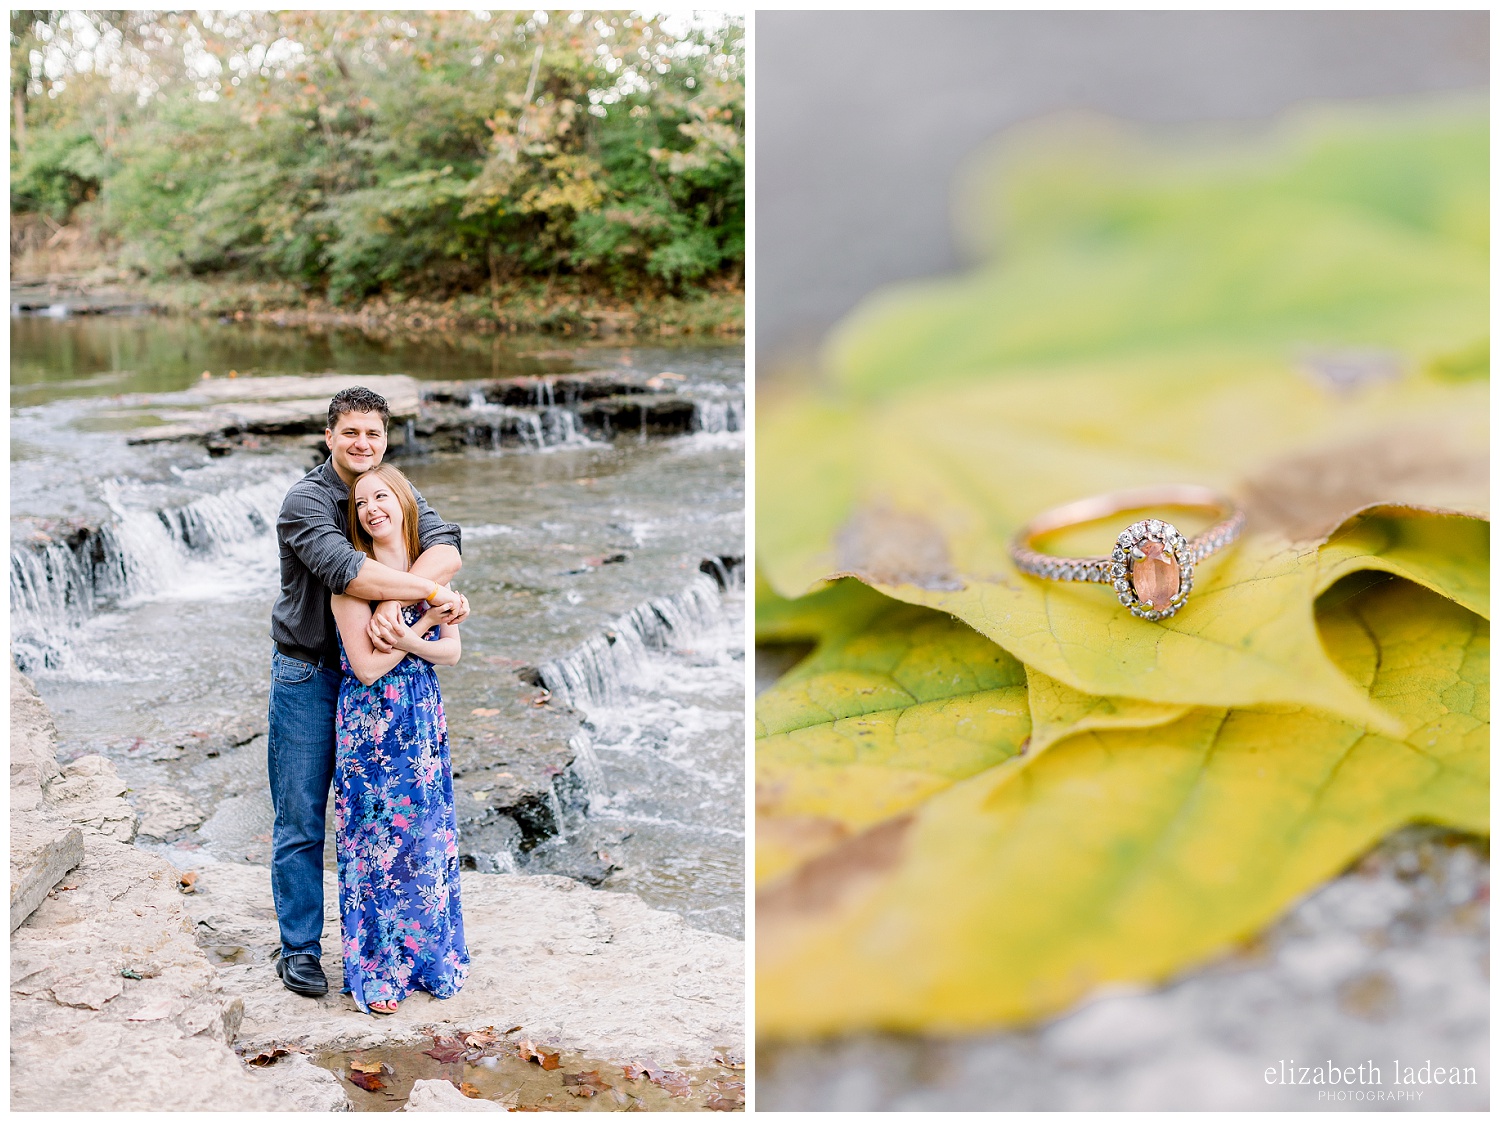 Northland-KC-Fall-Engagement-Photos-with-dog-A+B-2018-elizabeth-ladean-photography-photo_1492.jpg